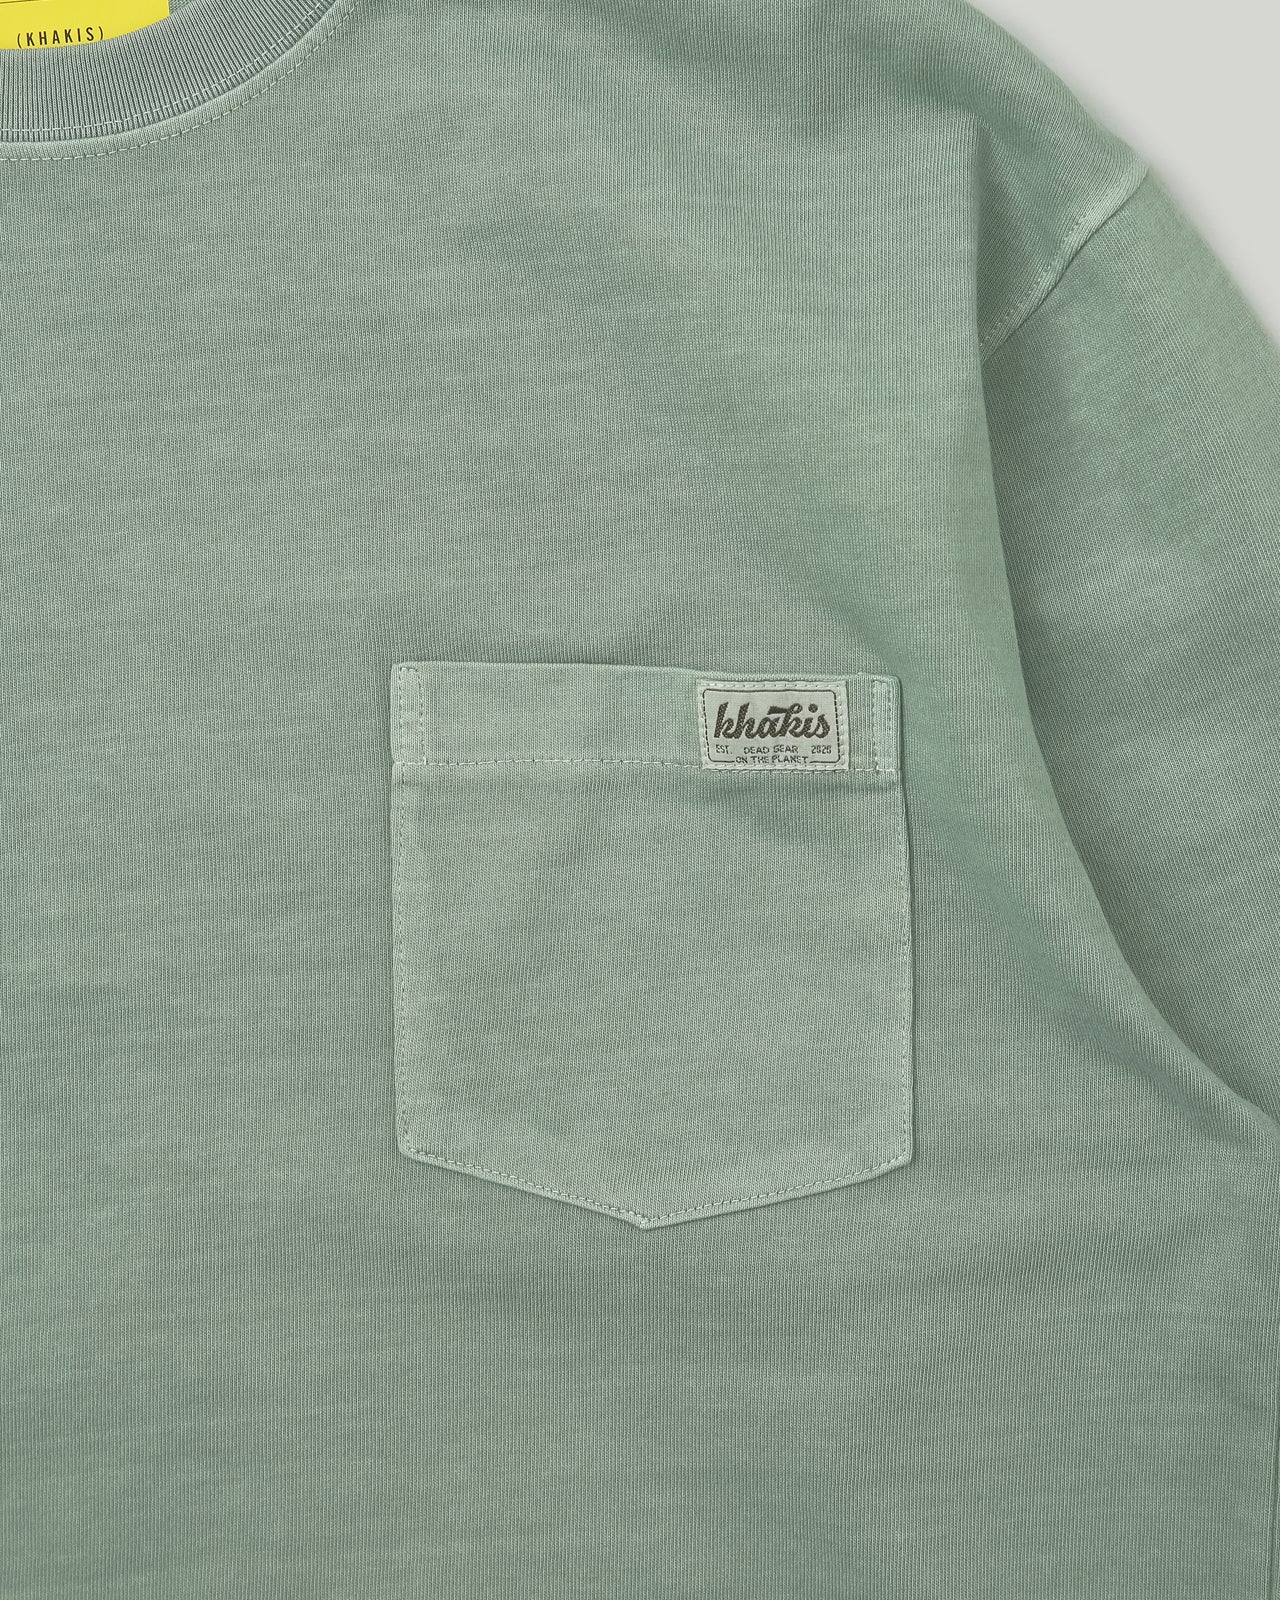 Overdyed L/S Tee Green